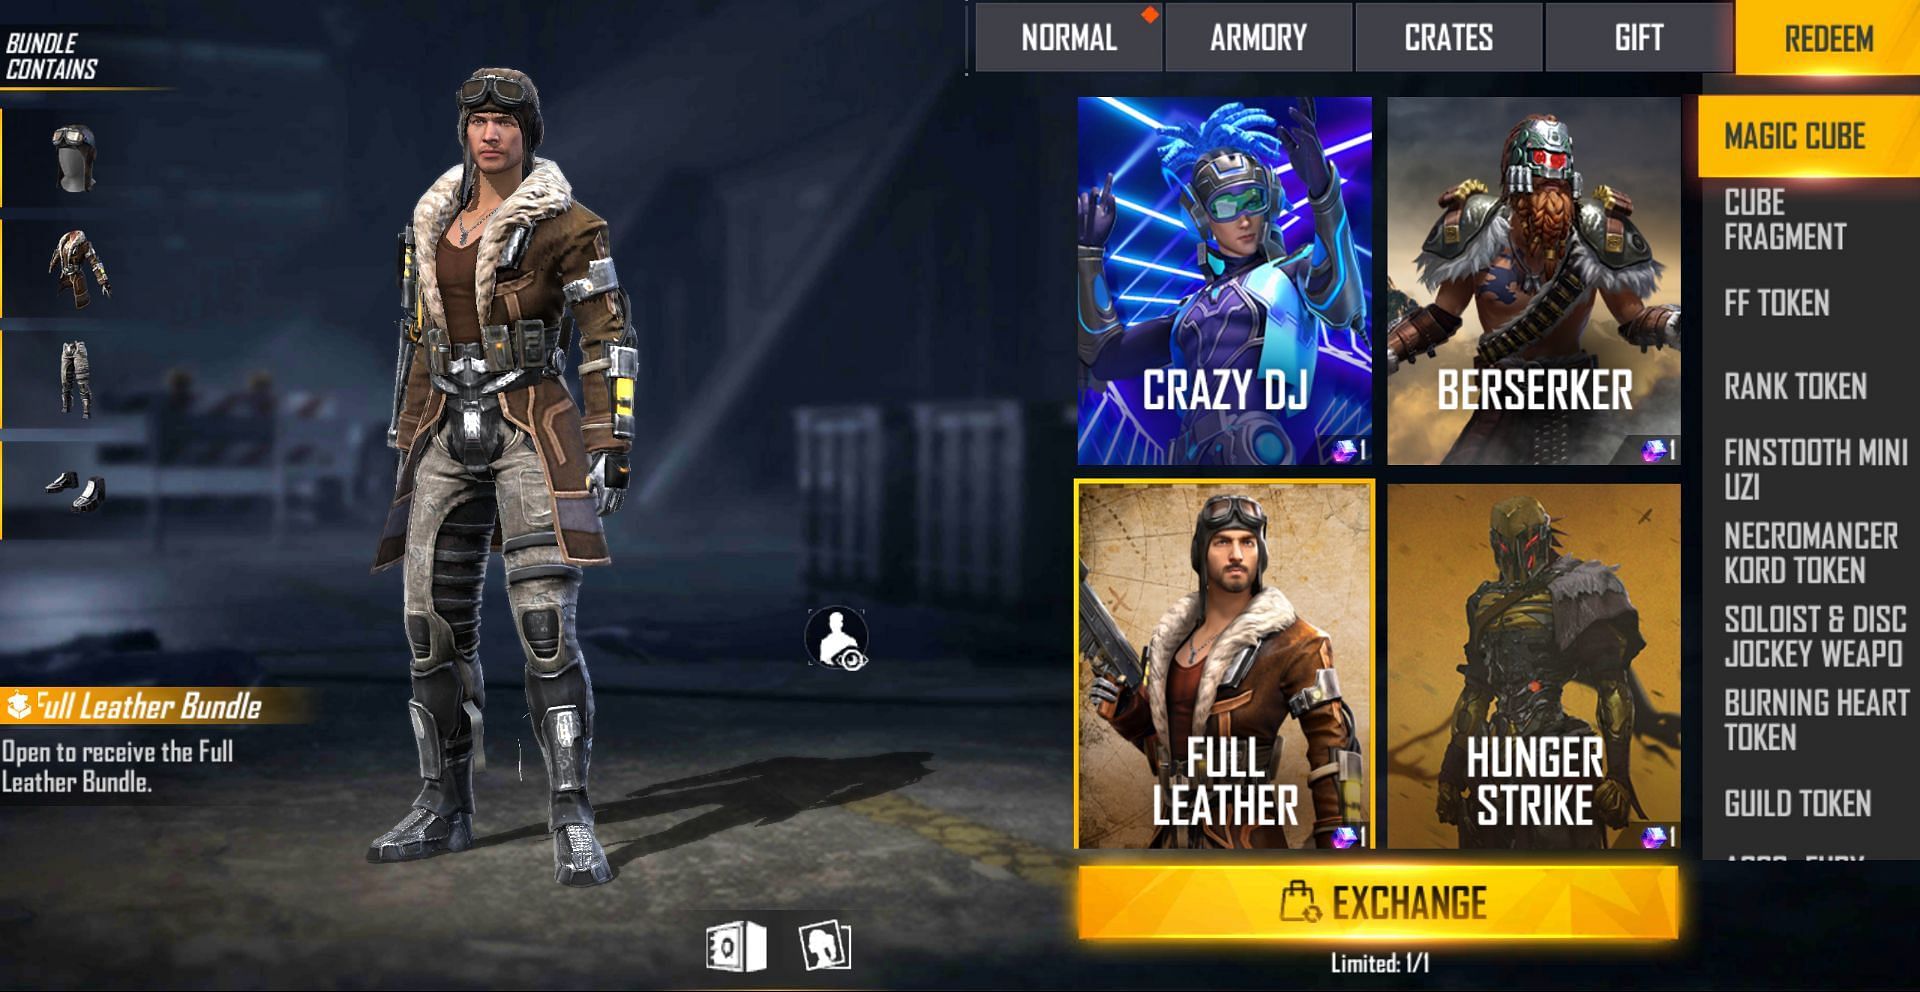 Full Leather Bundle can be claimed using a Magic Cube (Image via Free Fire)